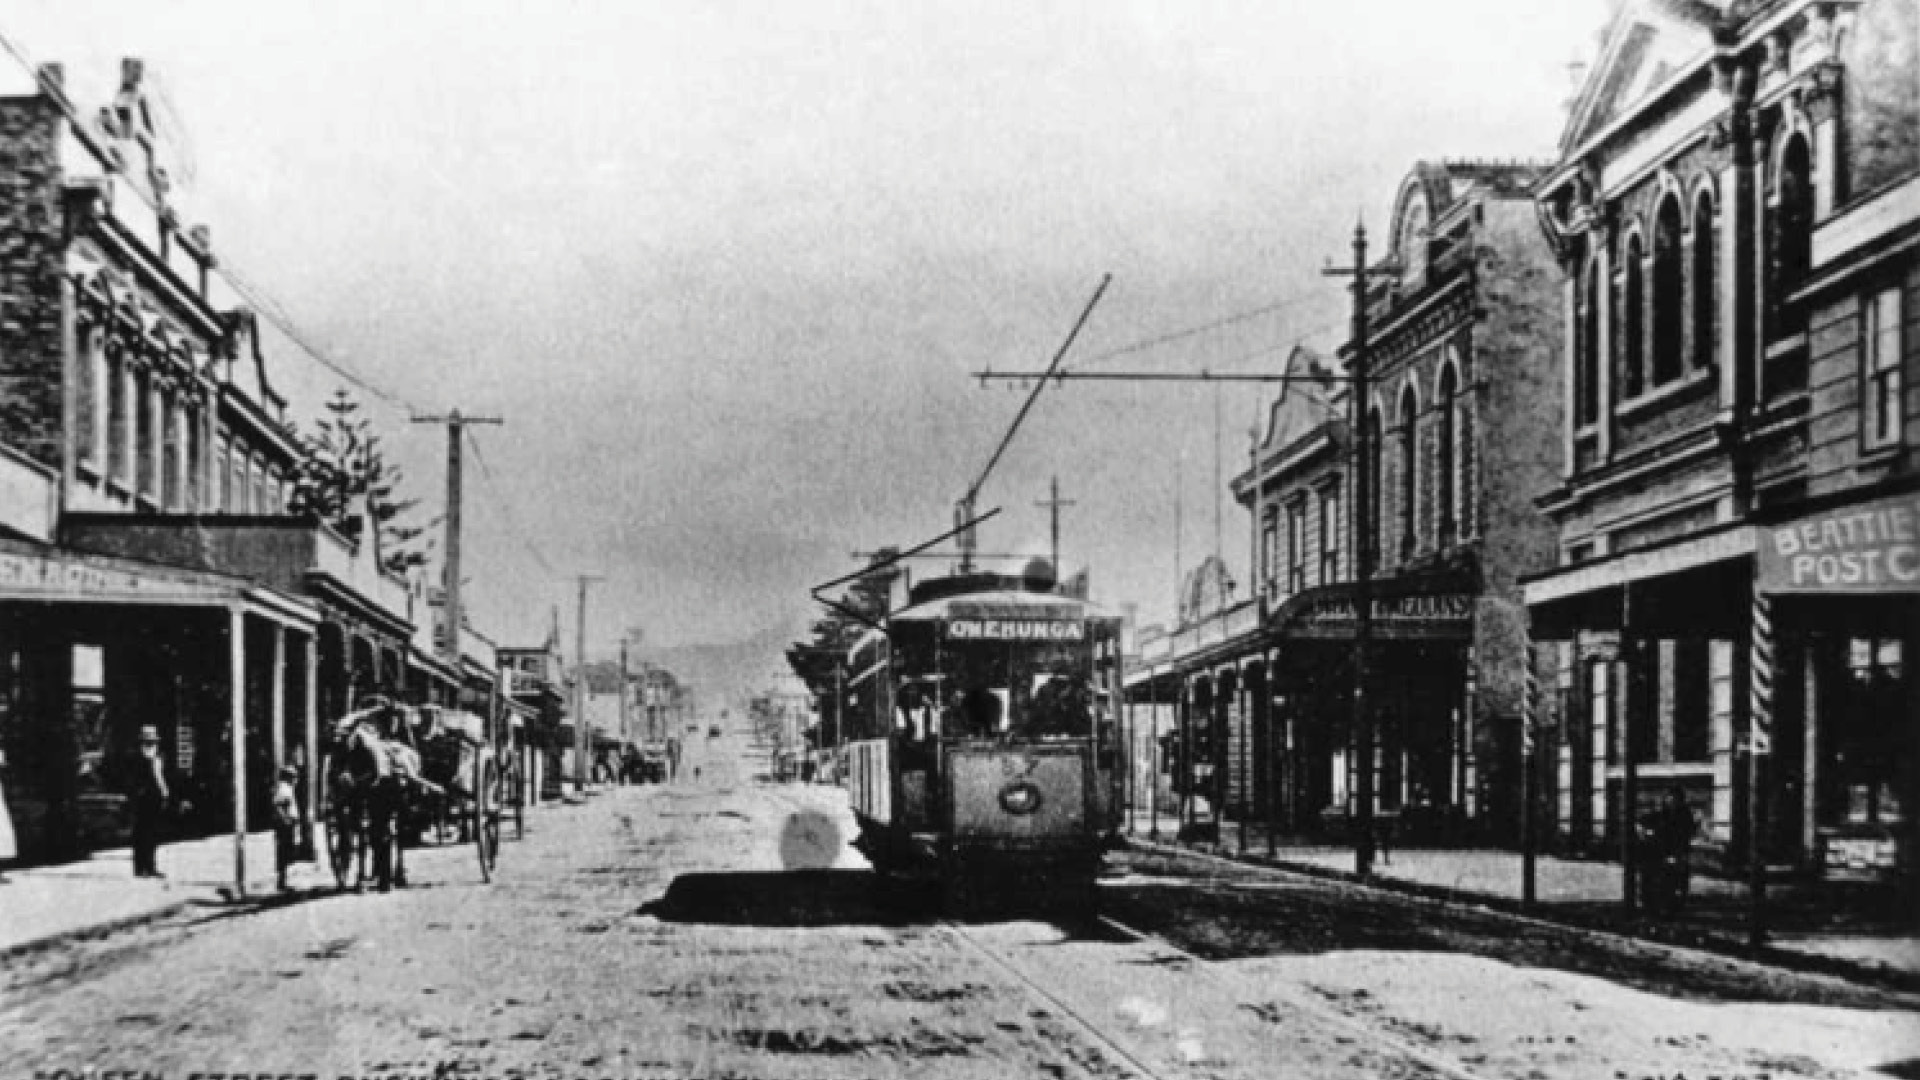 Queen Street-Onehunga Tram looking towards Maungakiekie One Tree Hill. Sir George Grey Special Collections, Auckland Libraries, 957-152-3